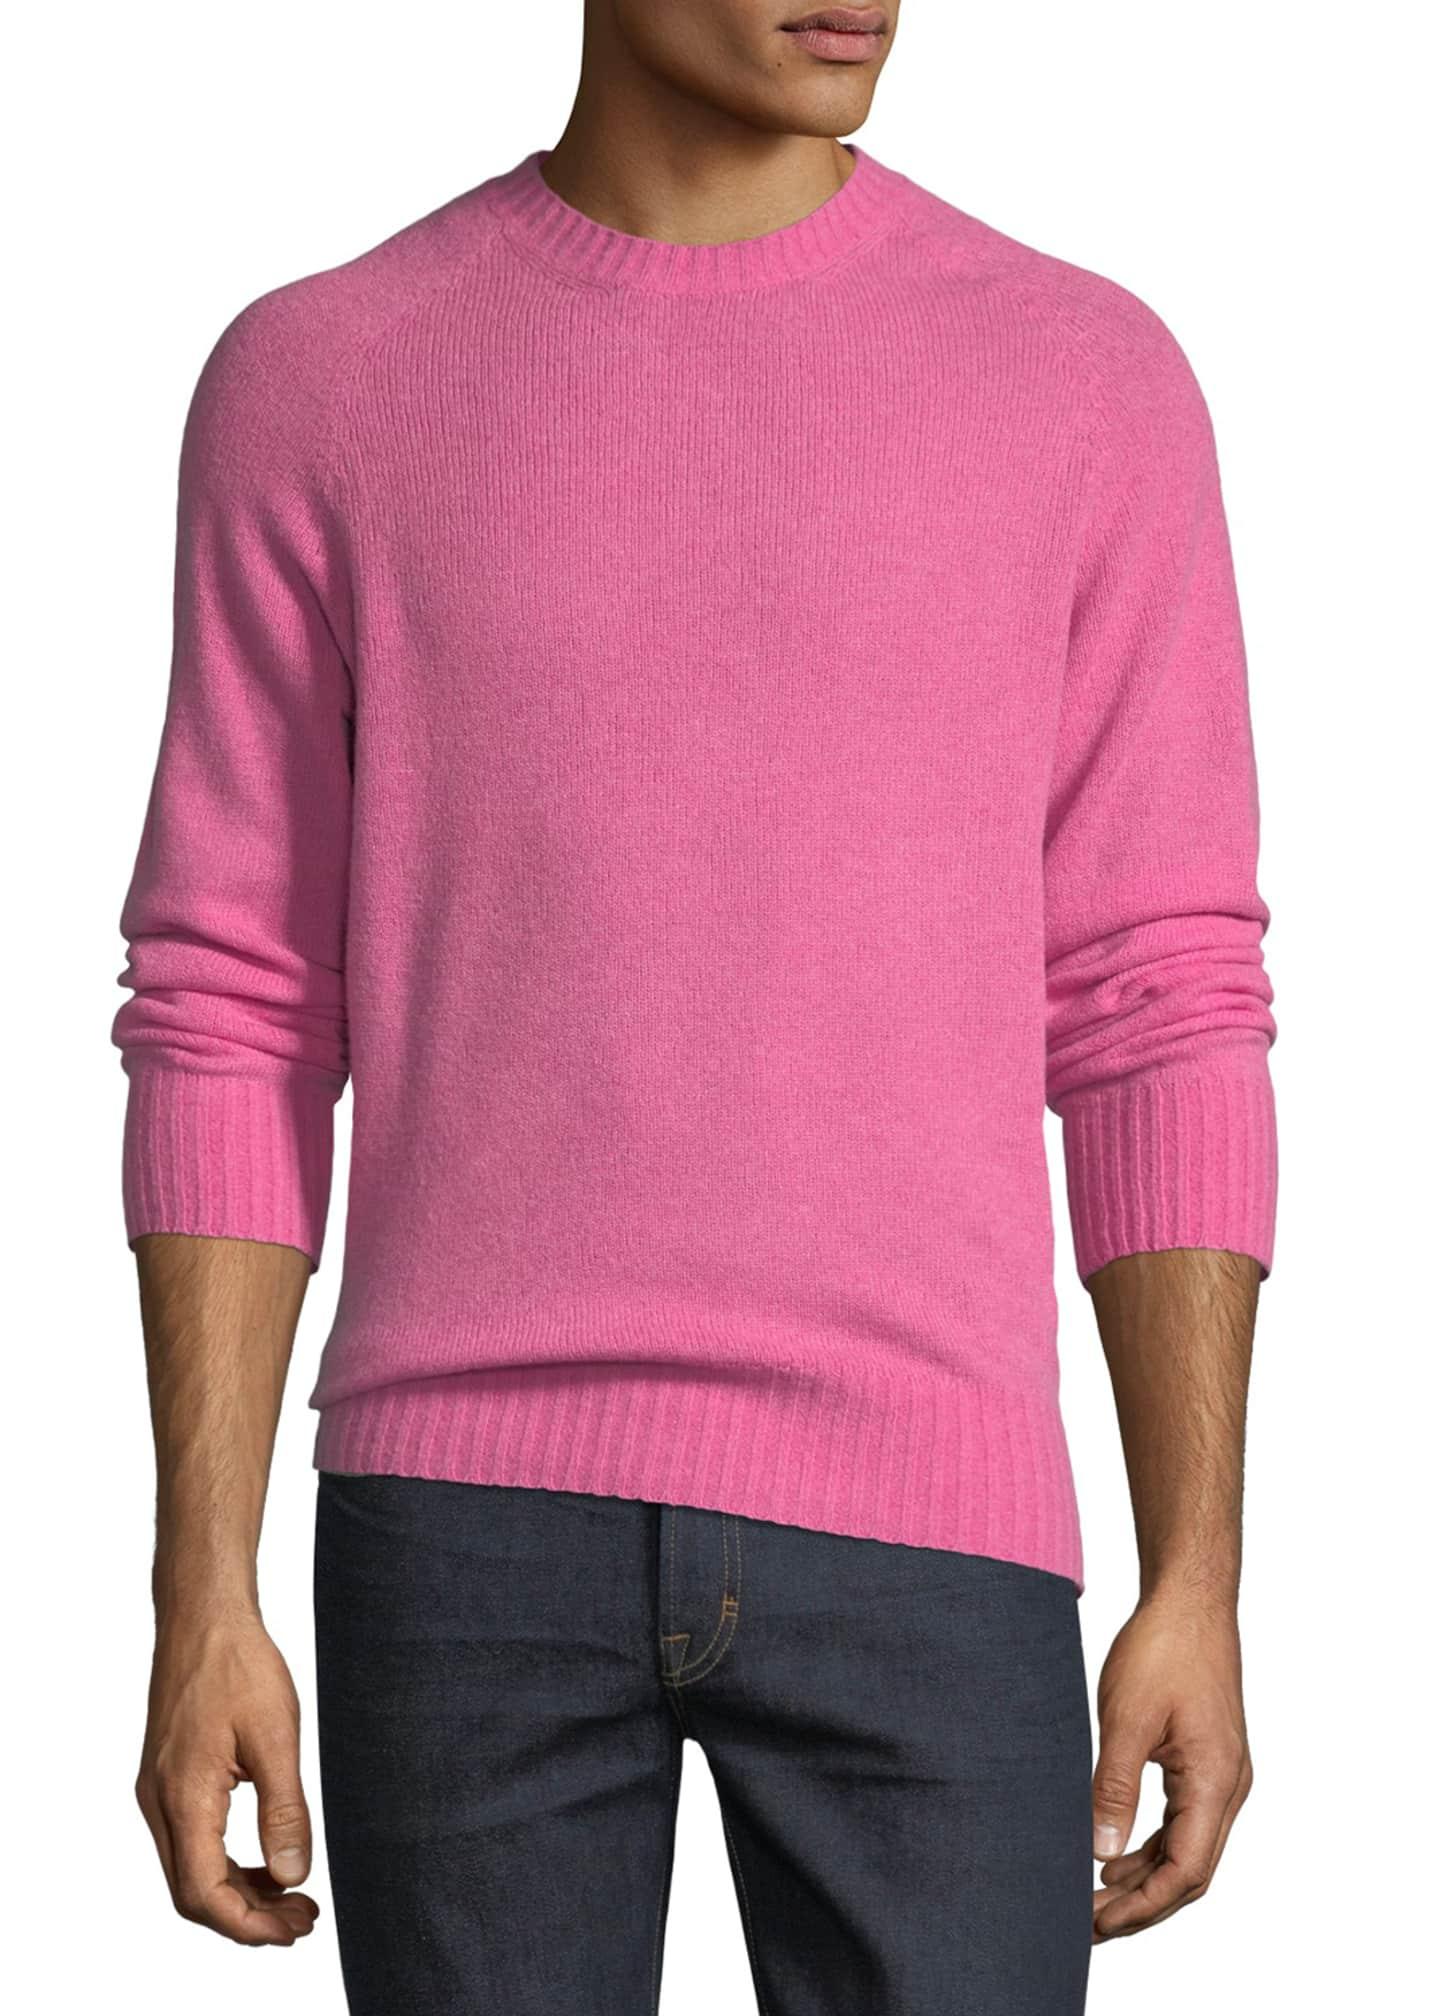 Tom Ford Super-soft Wool-blend Crewneck Sweater in Bright Pink (Pink ...